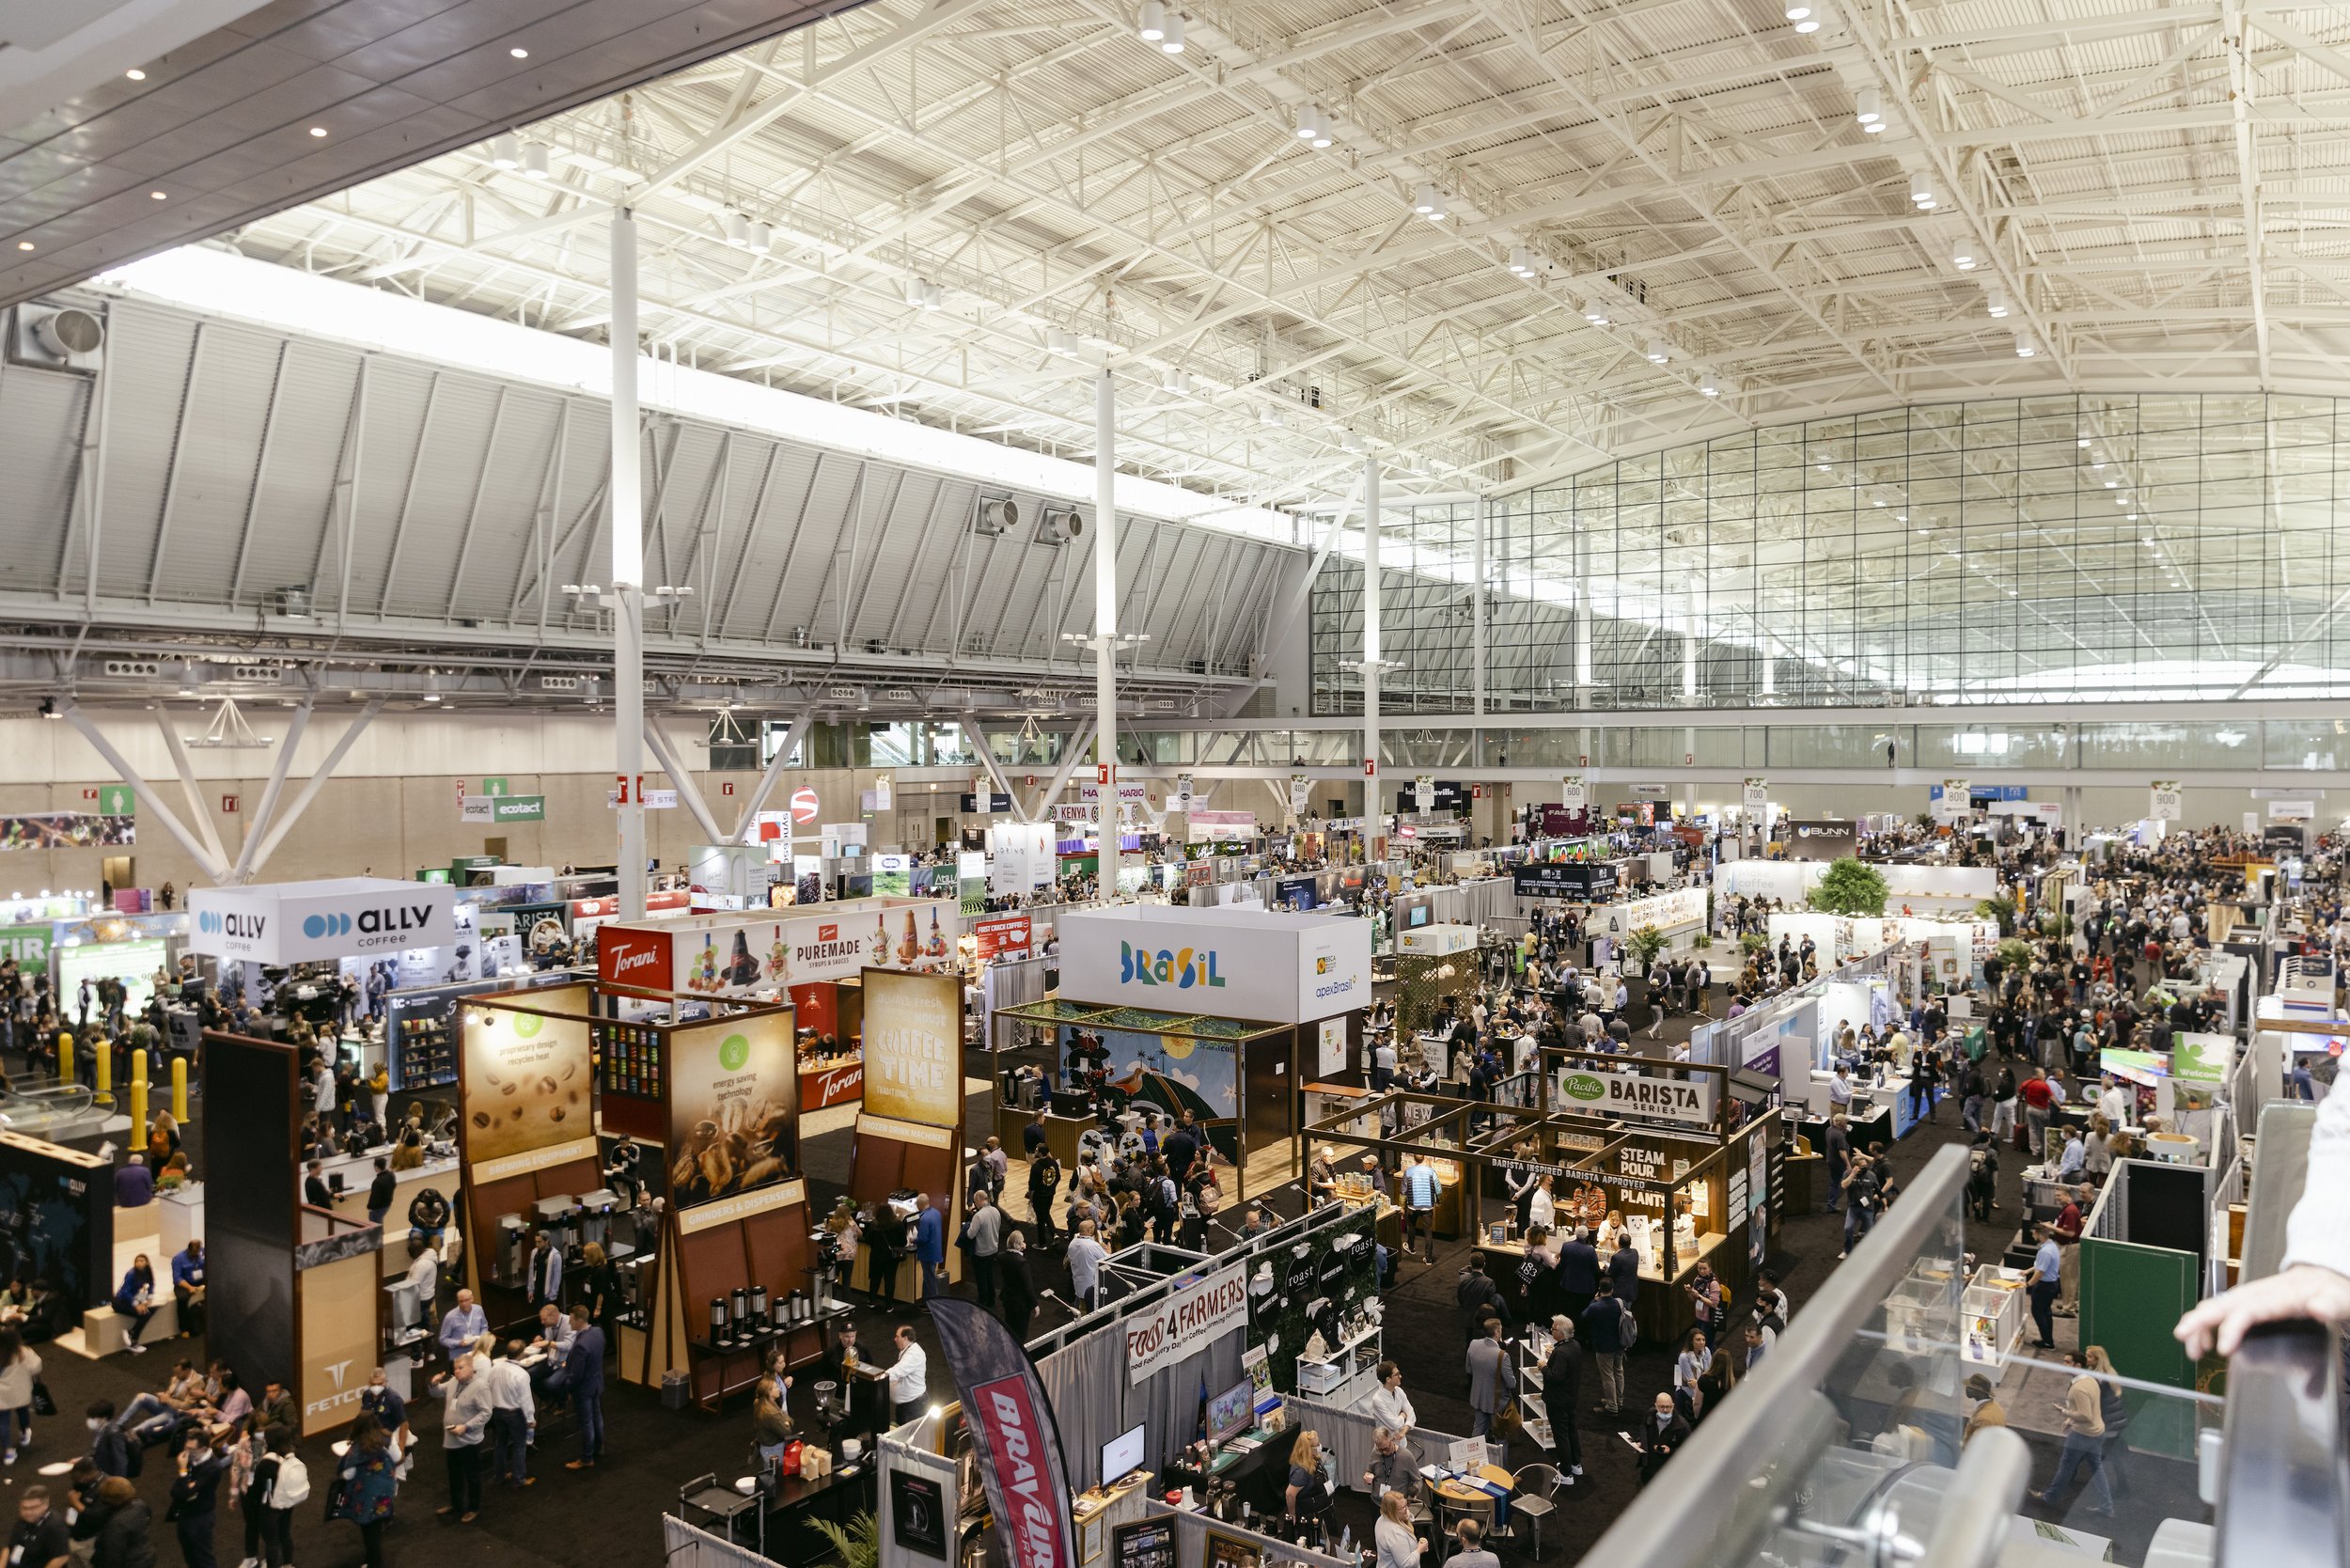 About Specialty Coffee Expo — Specialty Coffee Expo